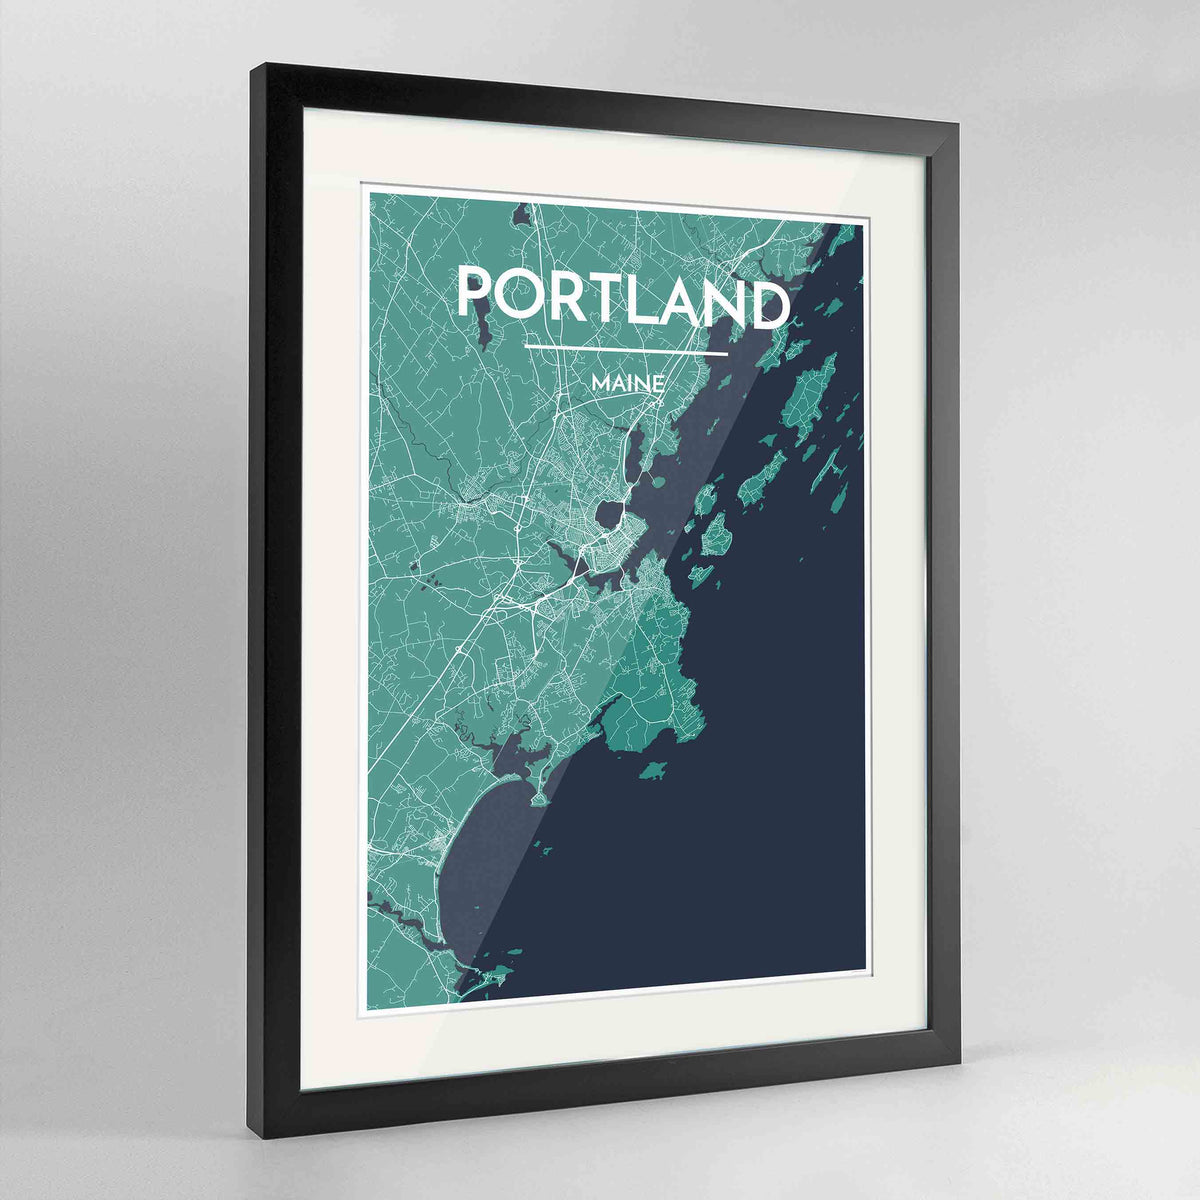 Framed Portland - Maine Map Art Print 24x36&quot; Contemporary Black frame Point Two Design Group